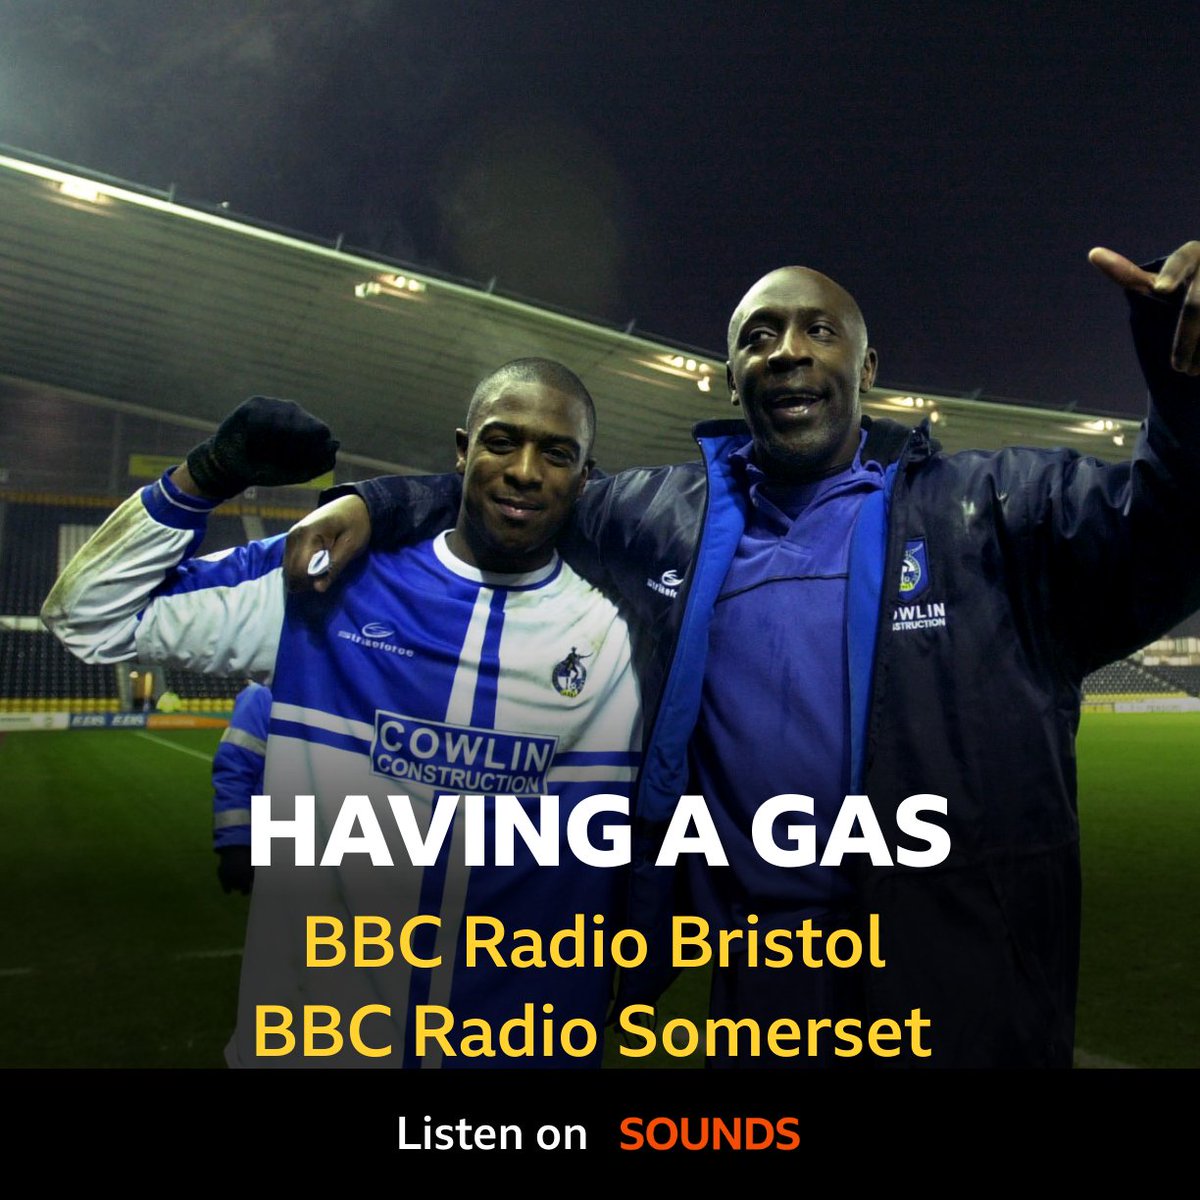 🔵 Having a Gas - 6pm @BBCRB @bbcsomerset ⚽️ Catch up with Rovers manager Matt Taylor ⚽️ @Ed__Dawes previews Rovers v Derby ⚽️⚽️⚽️ 21 years since his hattrick at Derby, an extended interview with ex-Rovers striker Nathan Ellington